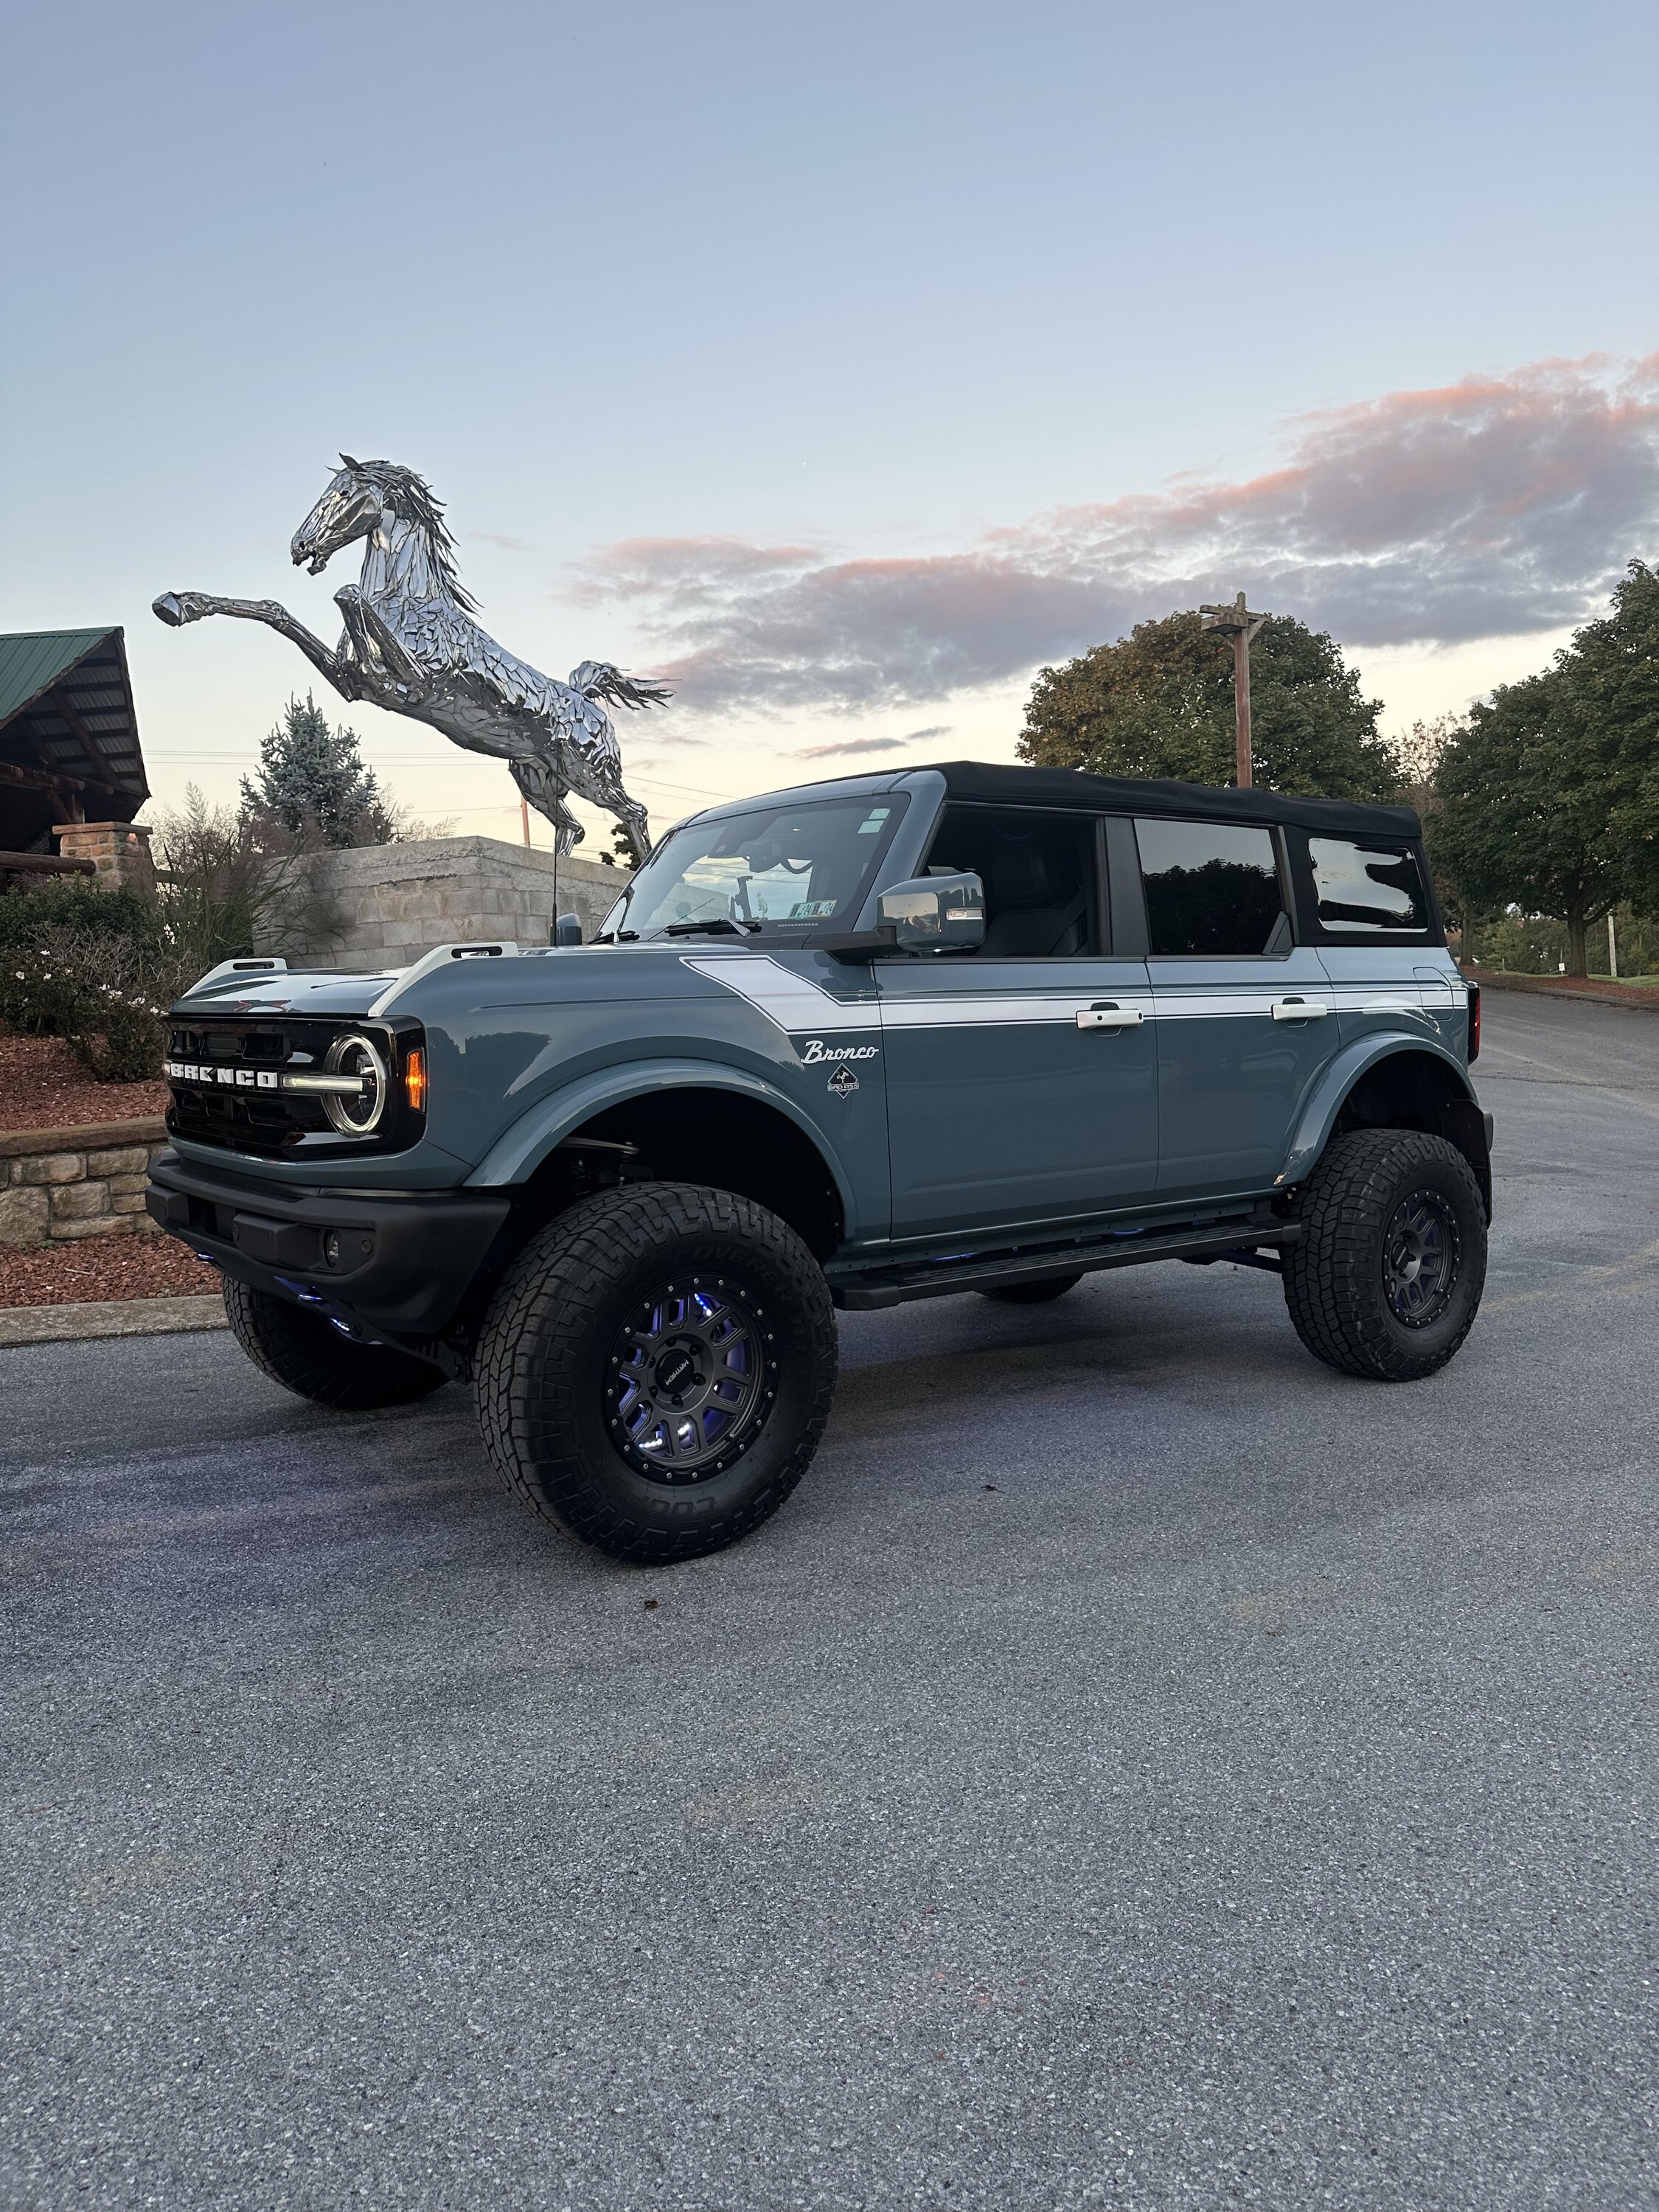 Ford Bronco Just sharing a picture of my Bronco build IMG_0569